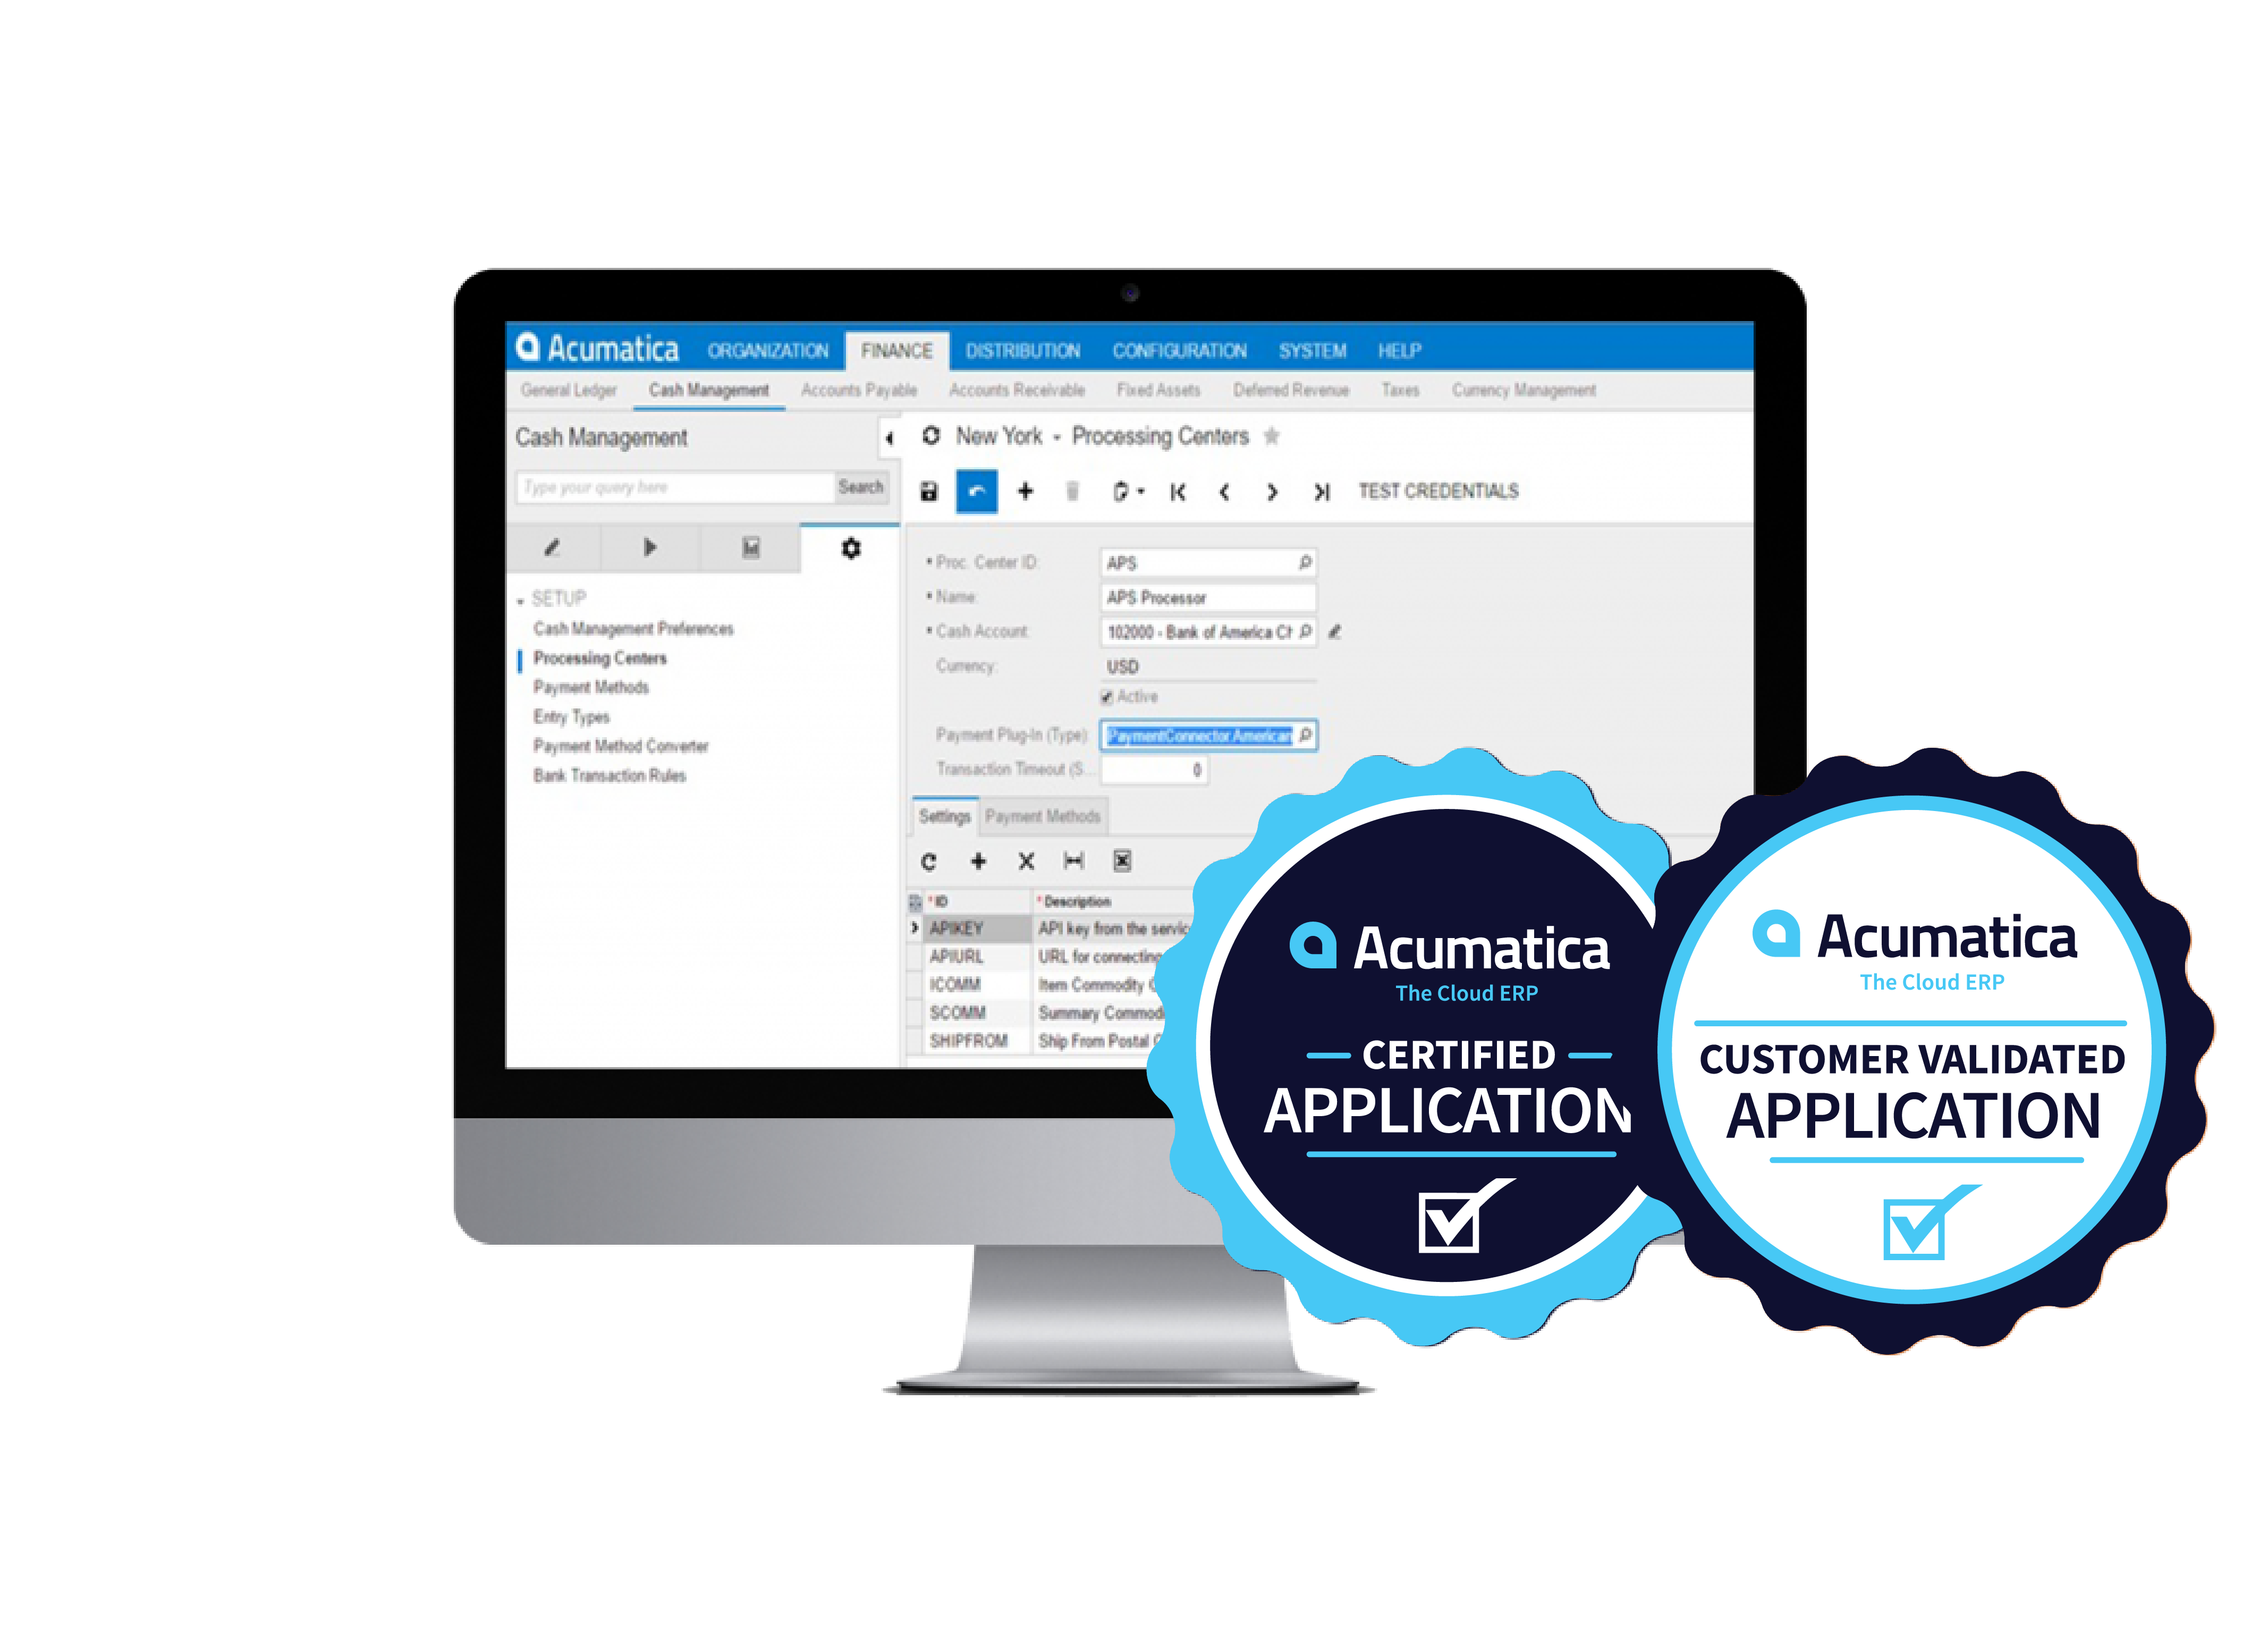 Save Time With the Acumatica Shopify Integration